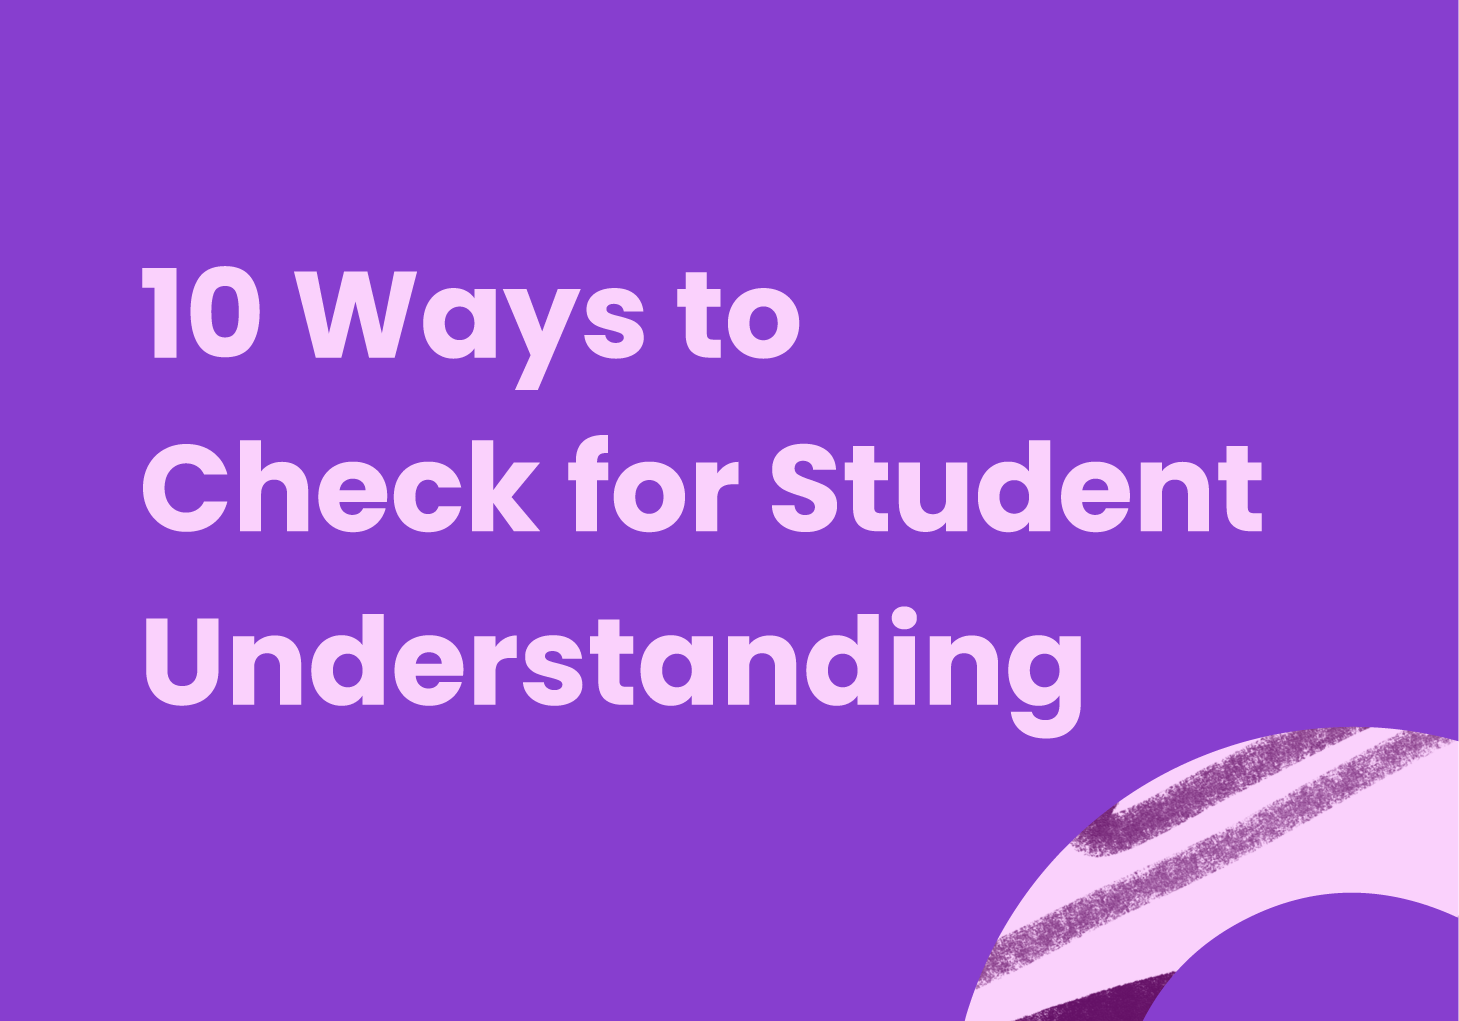 10 Ways to Check for Student Understanding